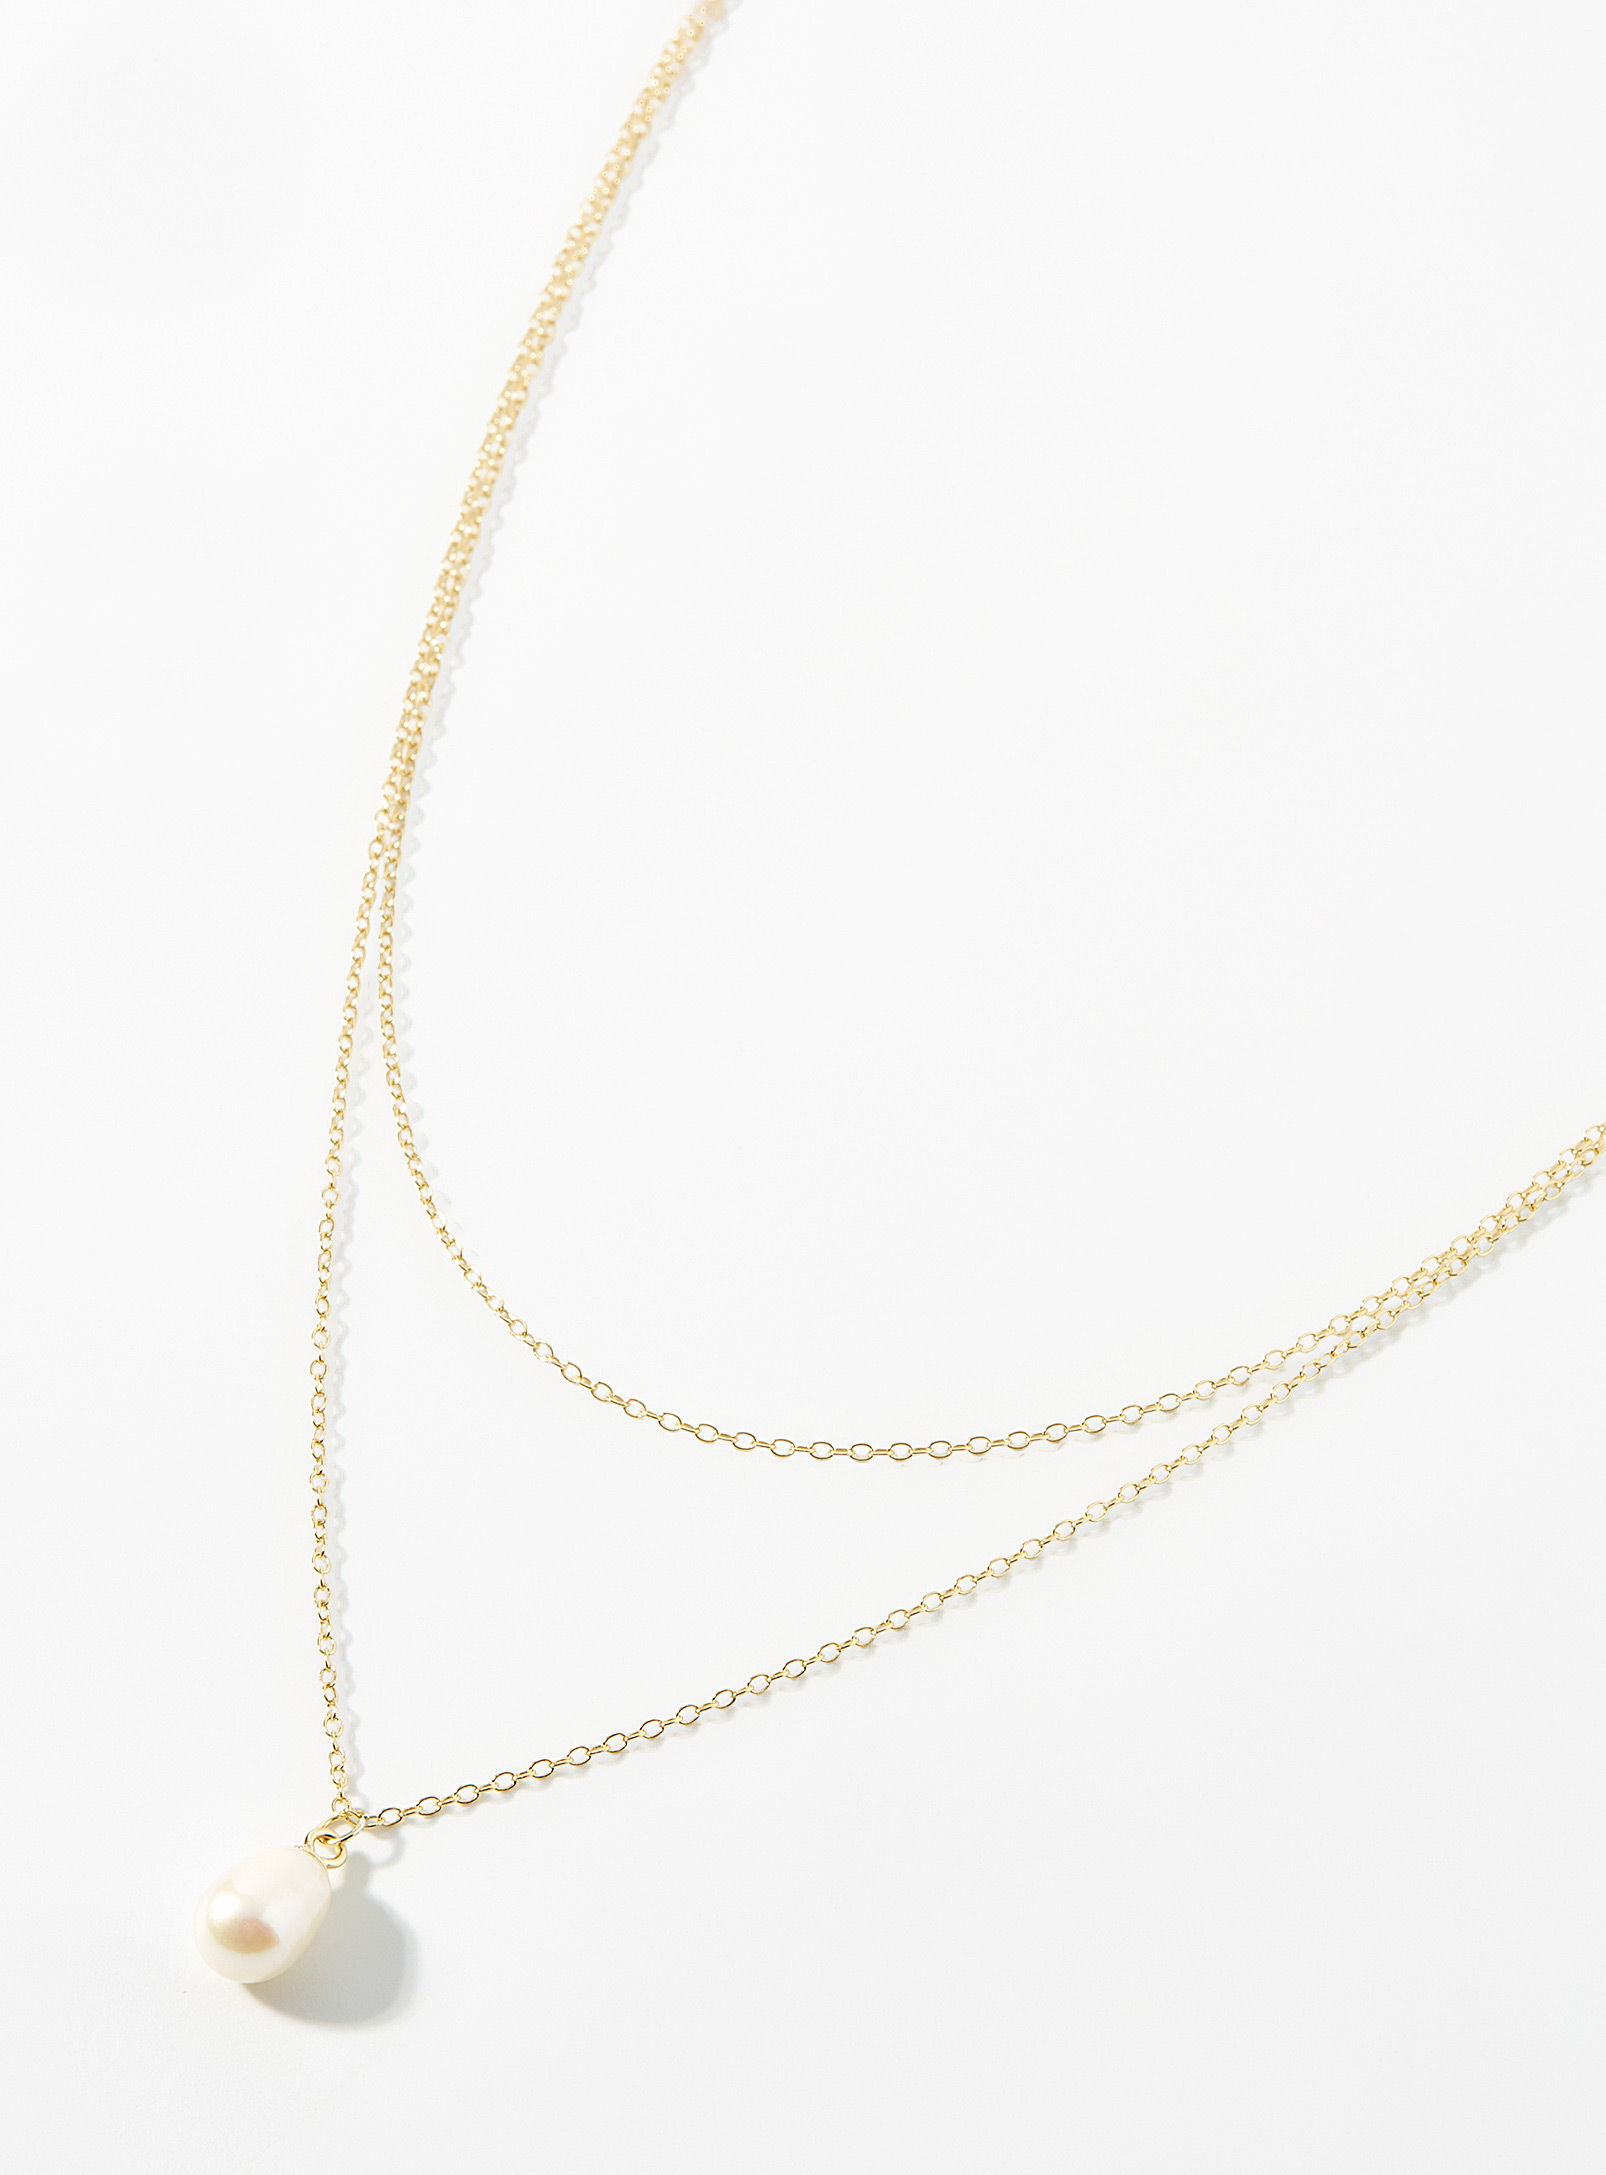 Midi34 X Simons Marjorie Necklace In Assorted